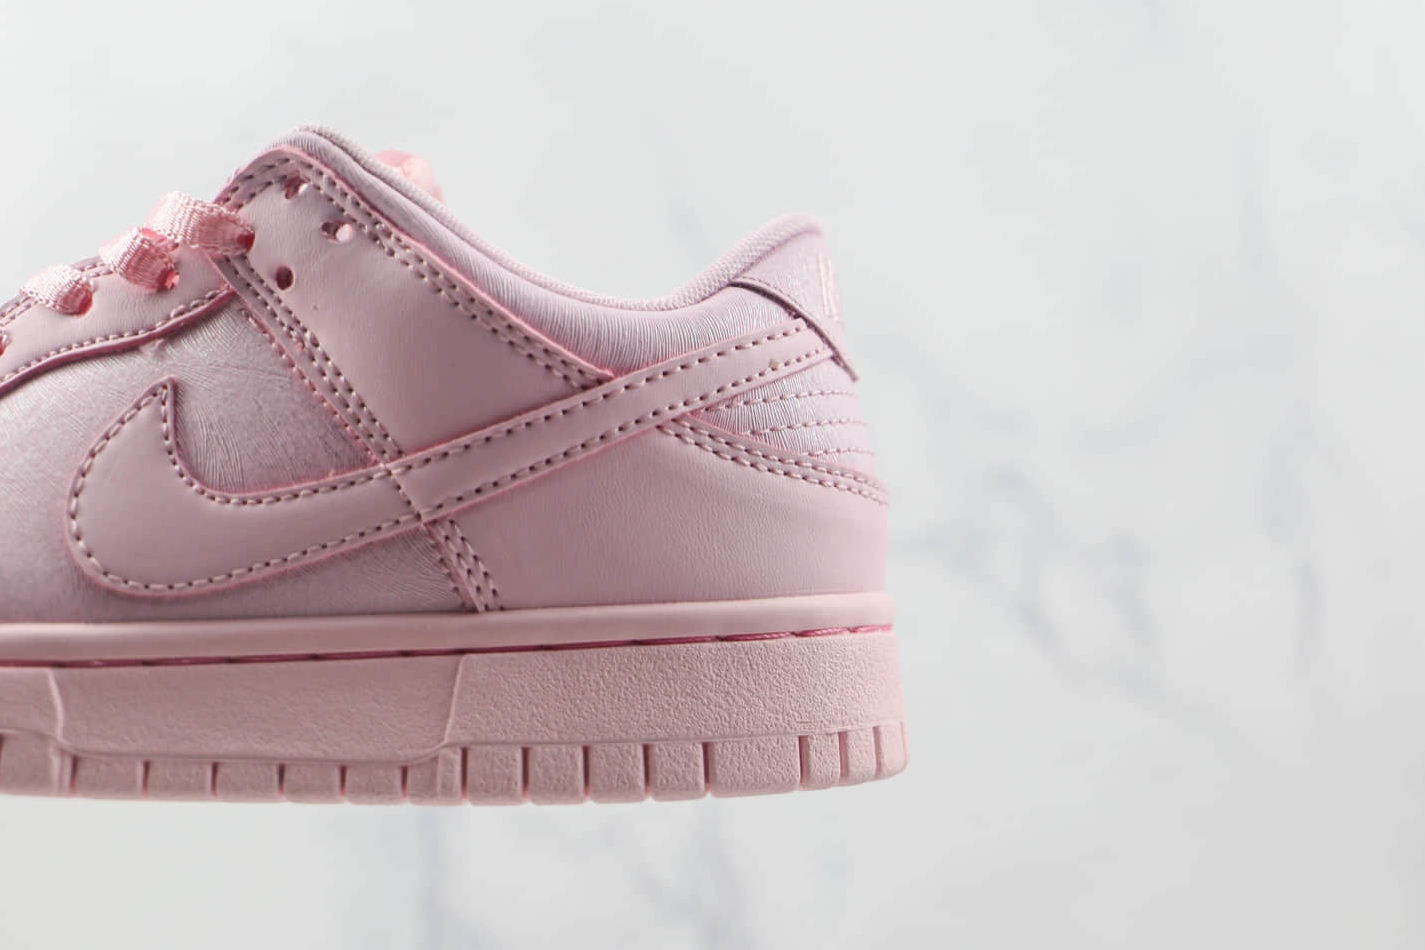 Nike Dunk Low SE 'Prism Pink' 921803-601 - Stylish and Vibrant Basketball Shoes